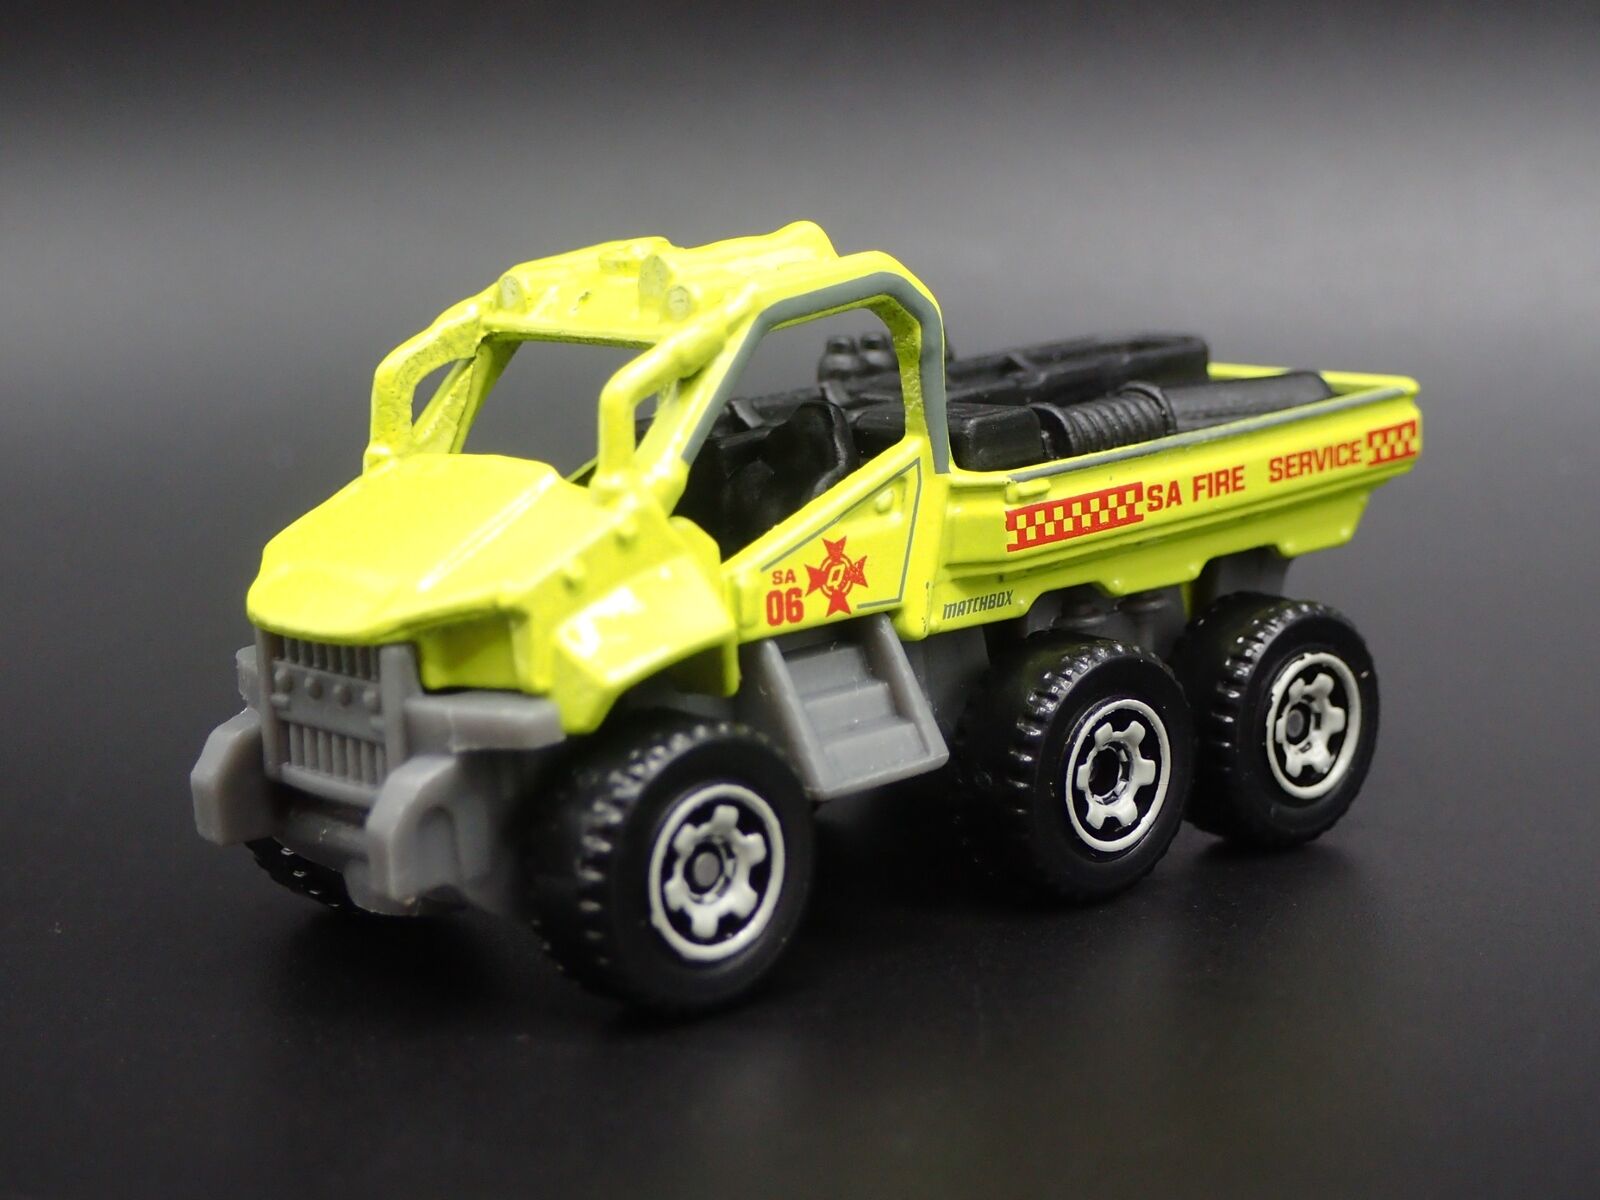 OFFROAD FIRE TRUCK RARE 1/64 MB SCALE COLLECTIBLE DIORAMA DIECAST MODEL CAR